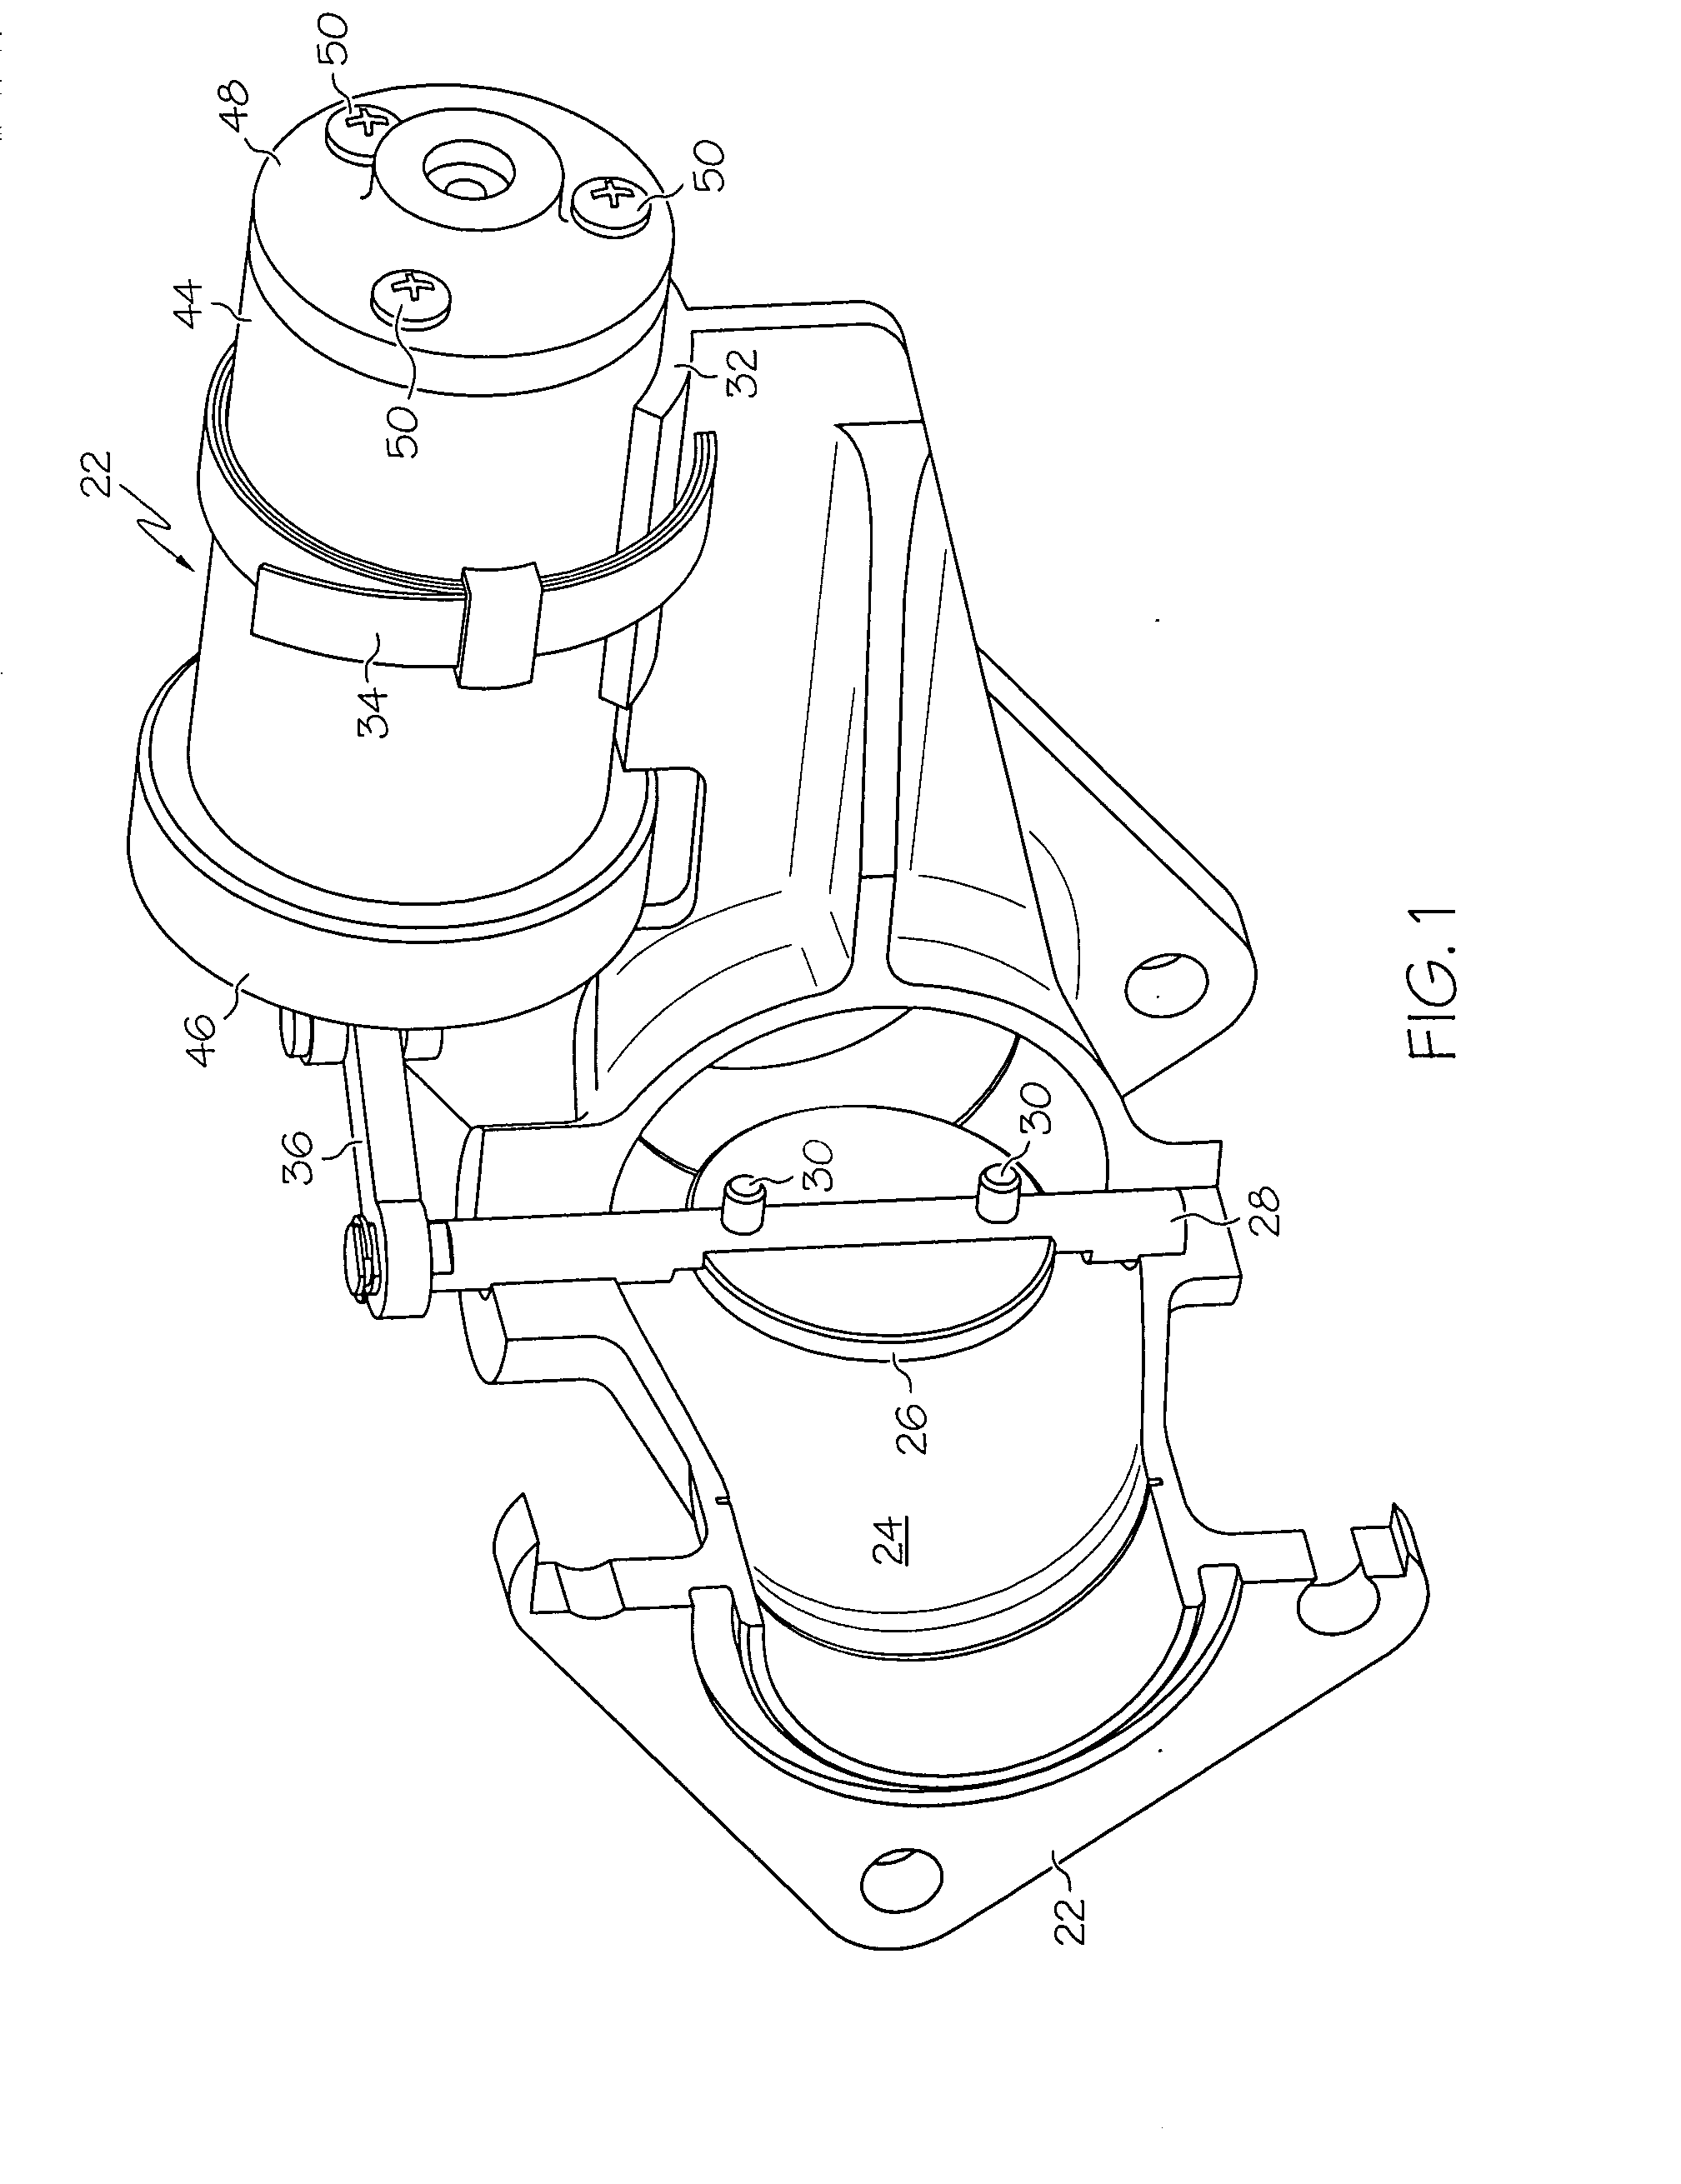 Valve actuator and throttle valve assembly employing the same